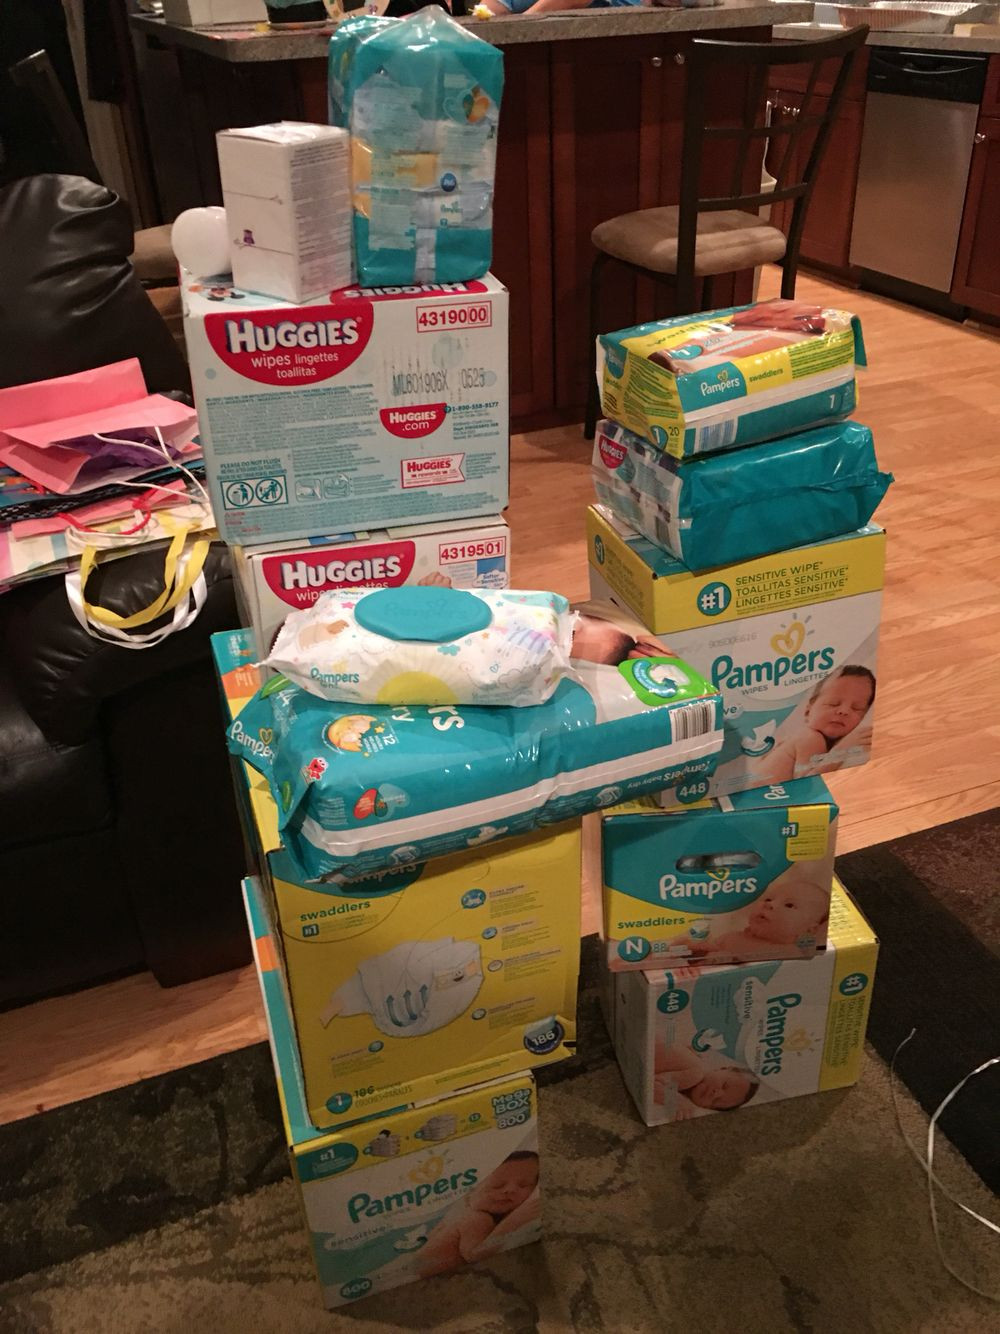 Baby Gender Reveal Party Gifts
 Ask guest to bring us Diaper and wipes for gender reveal